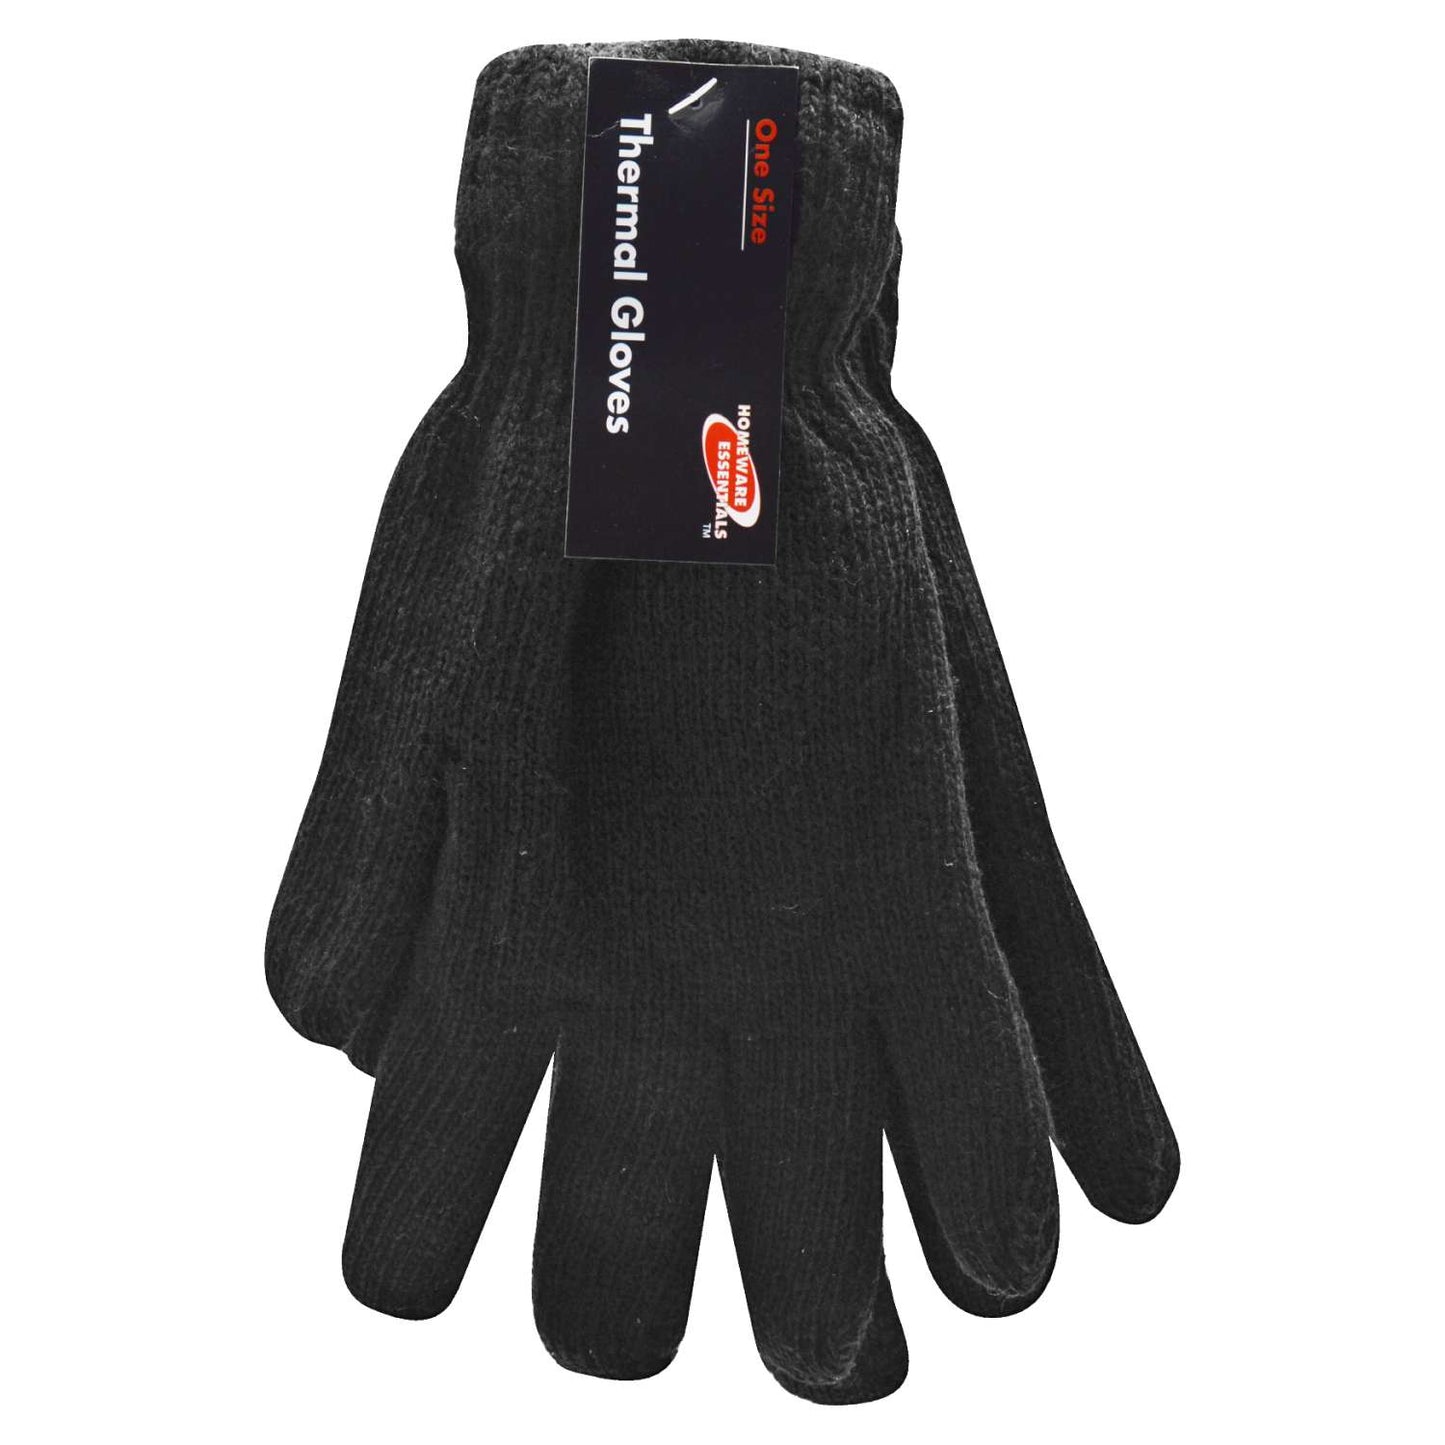 Thermal Gloves - One Size